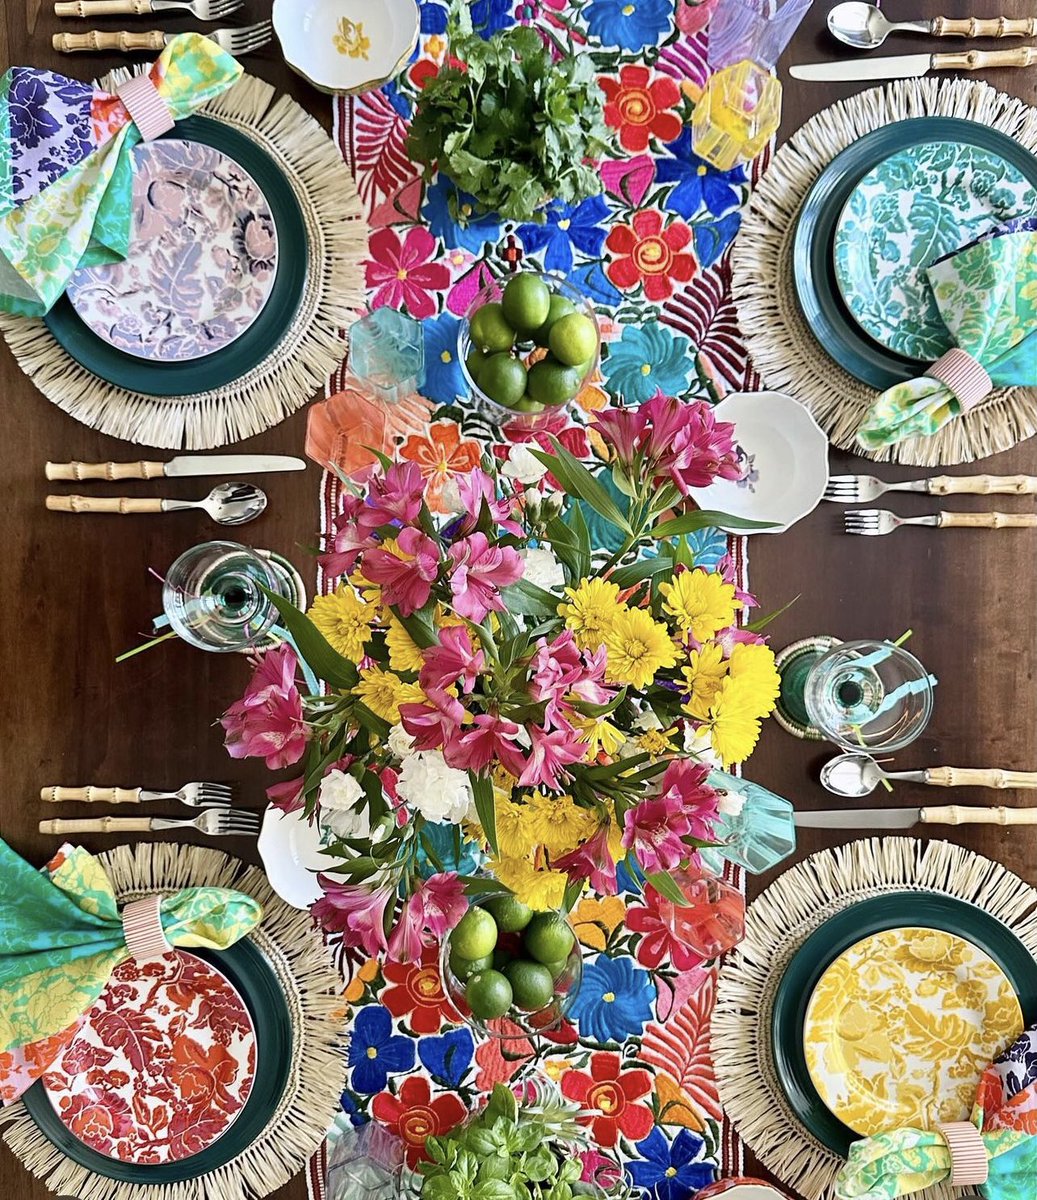 Whimsy tablescape